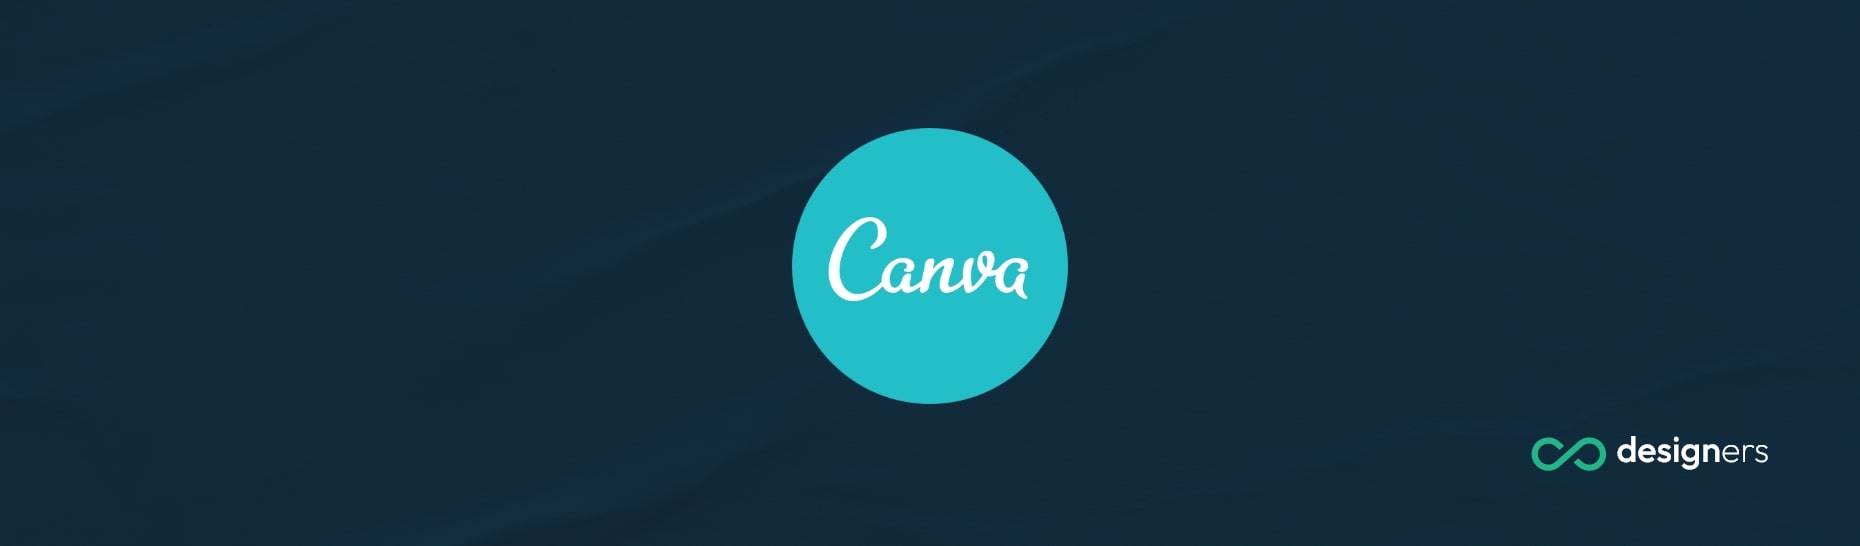 How Do I Increase Resolution in Canva?